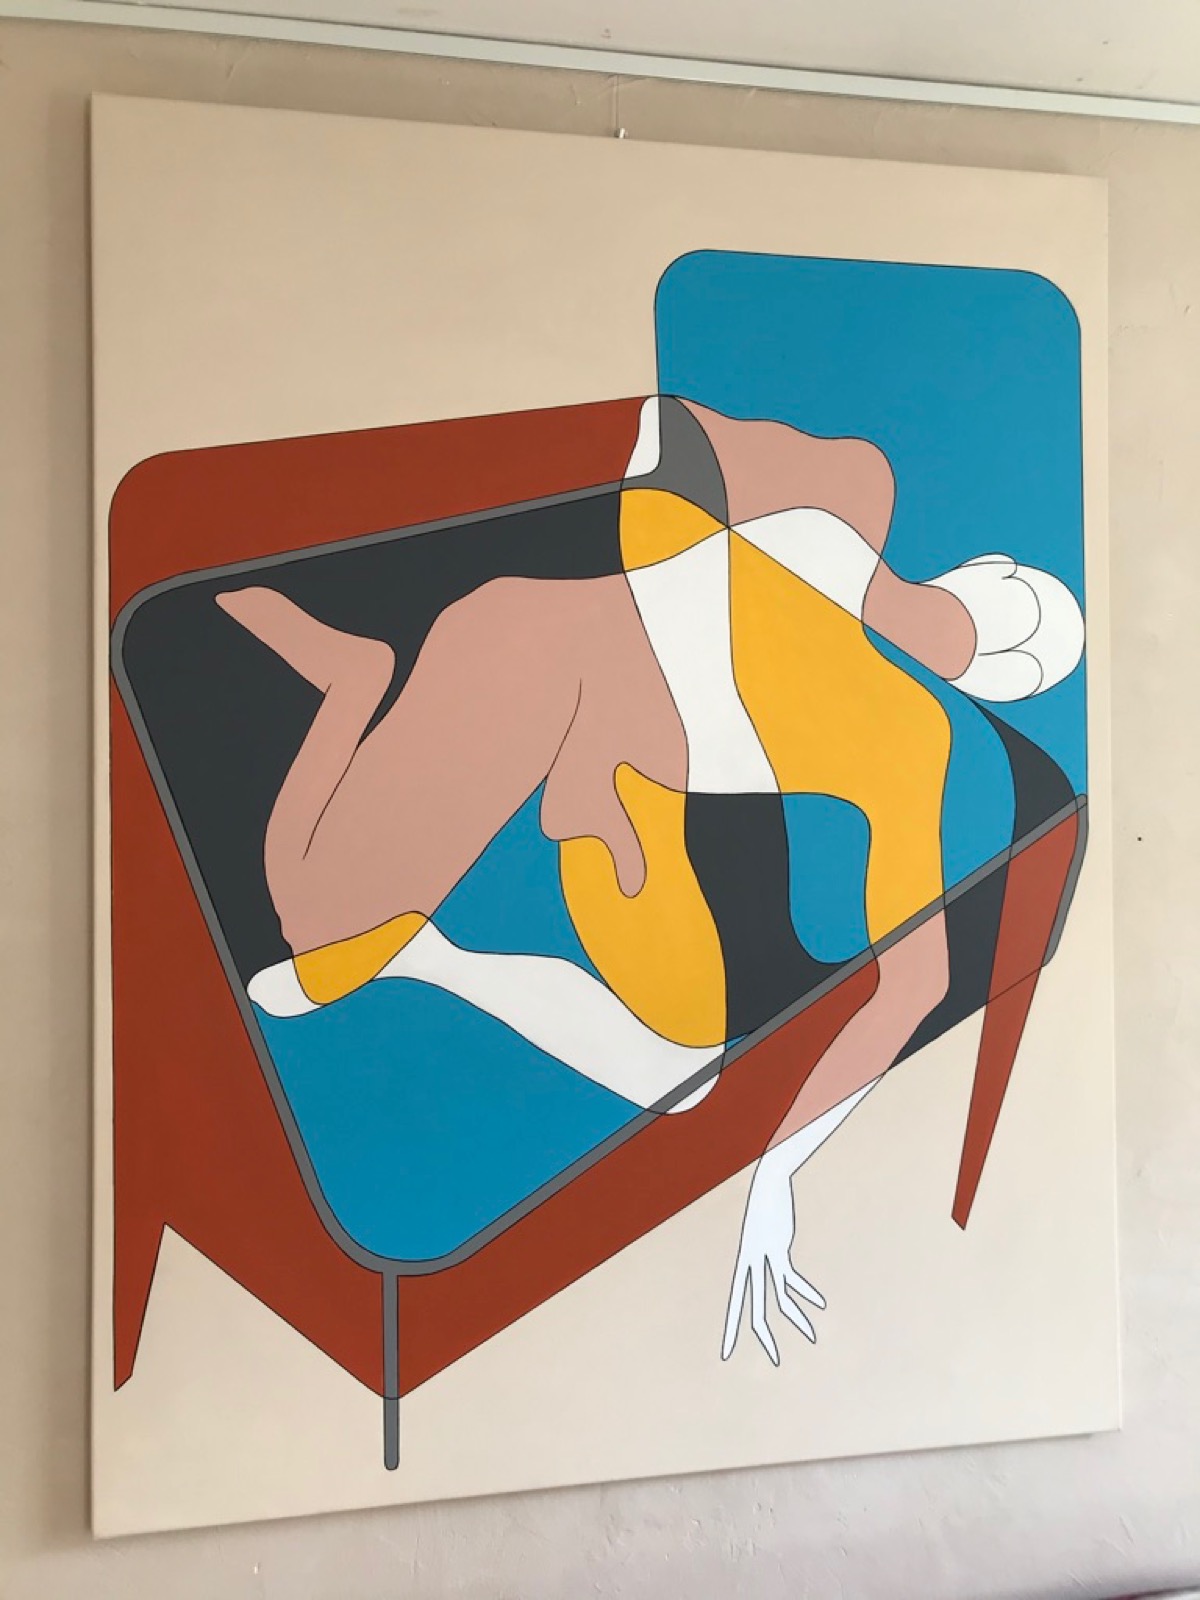 Bed (the unbearable vulnerability of being) - 155 cm x 120 cm